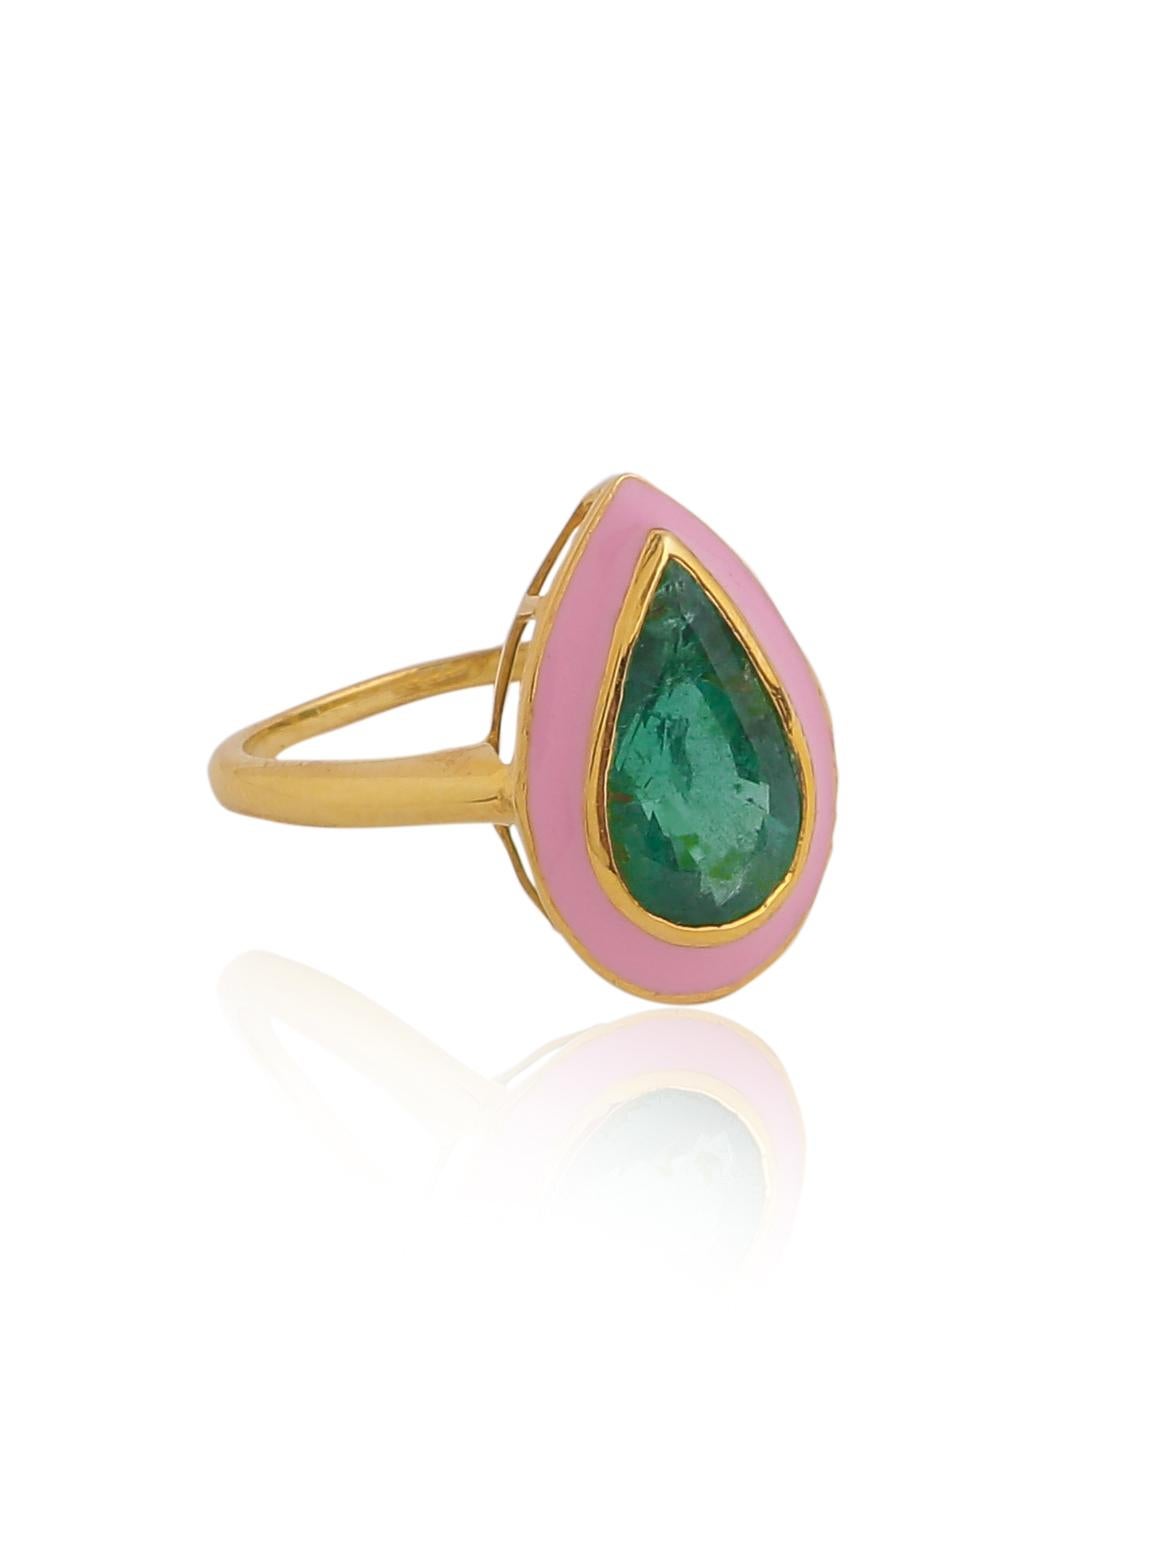 Pear Cut Natural 3.16 Carat Zambian Emerald Pear Ring with Pink Enamel in 18 Karat Gold For Sale